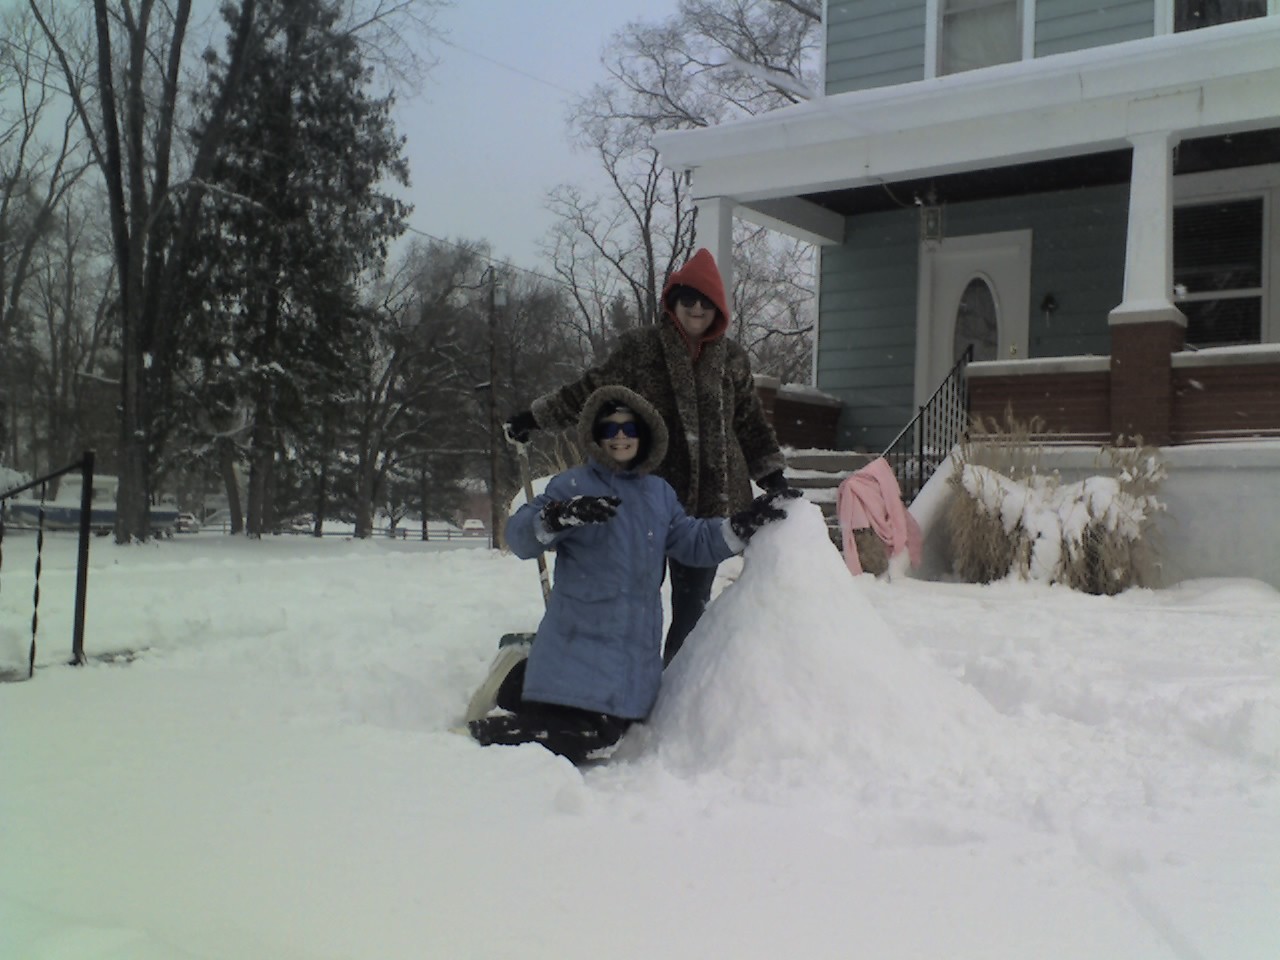 Bridget and Maryann working on their snowman.  They had fun outside getting wet and building this snowbaby with snow that just didn't want to pack. CLICK ME to see a bigger version.